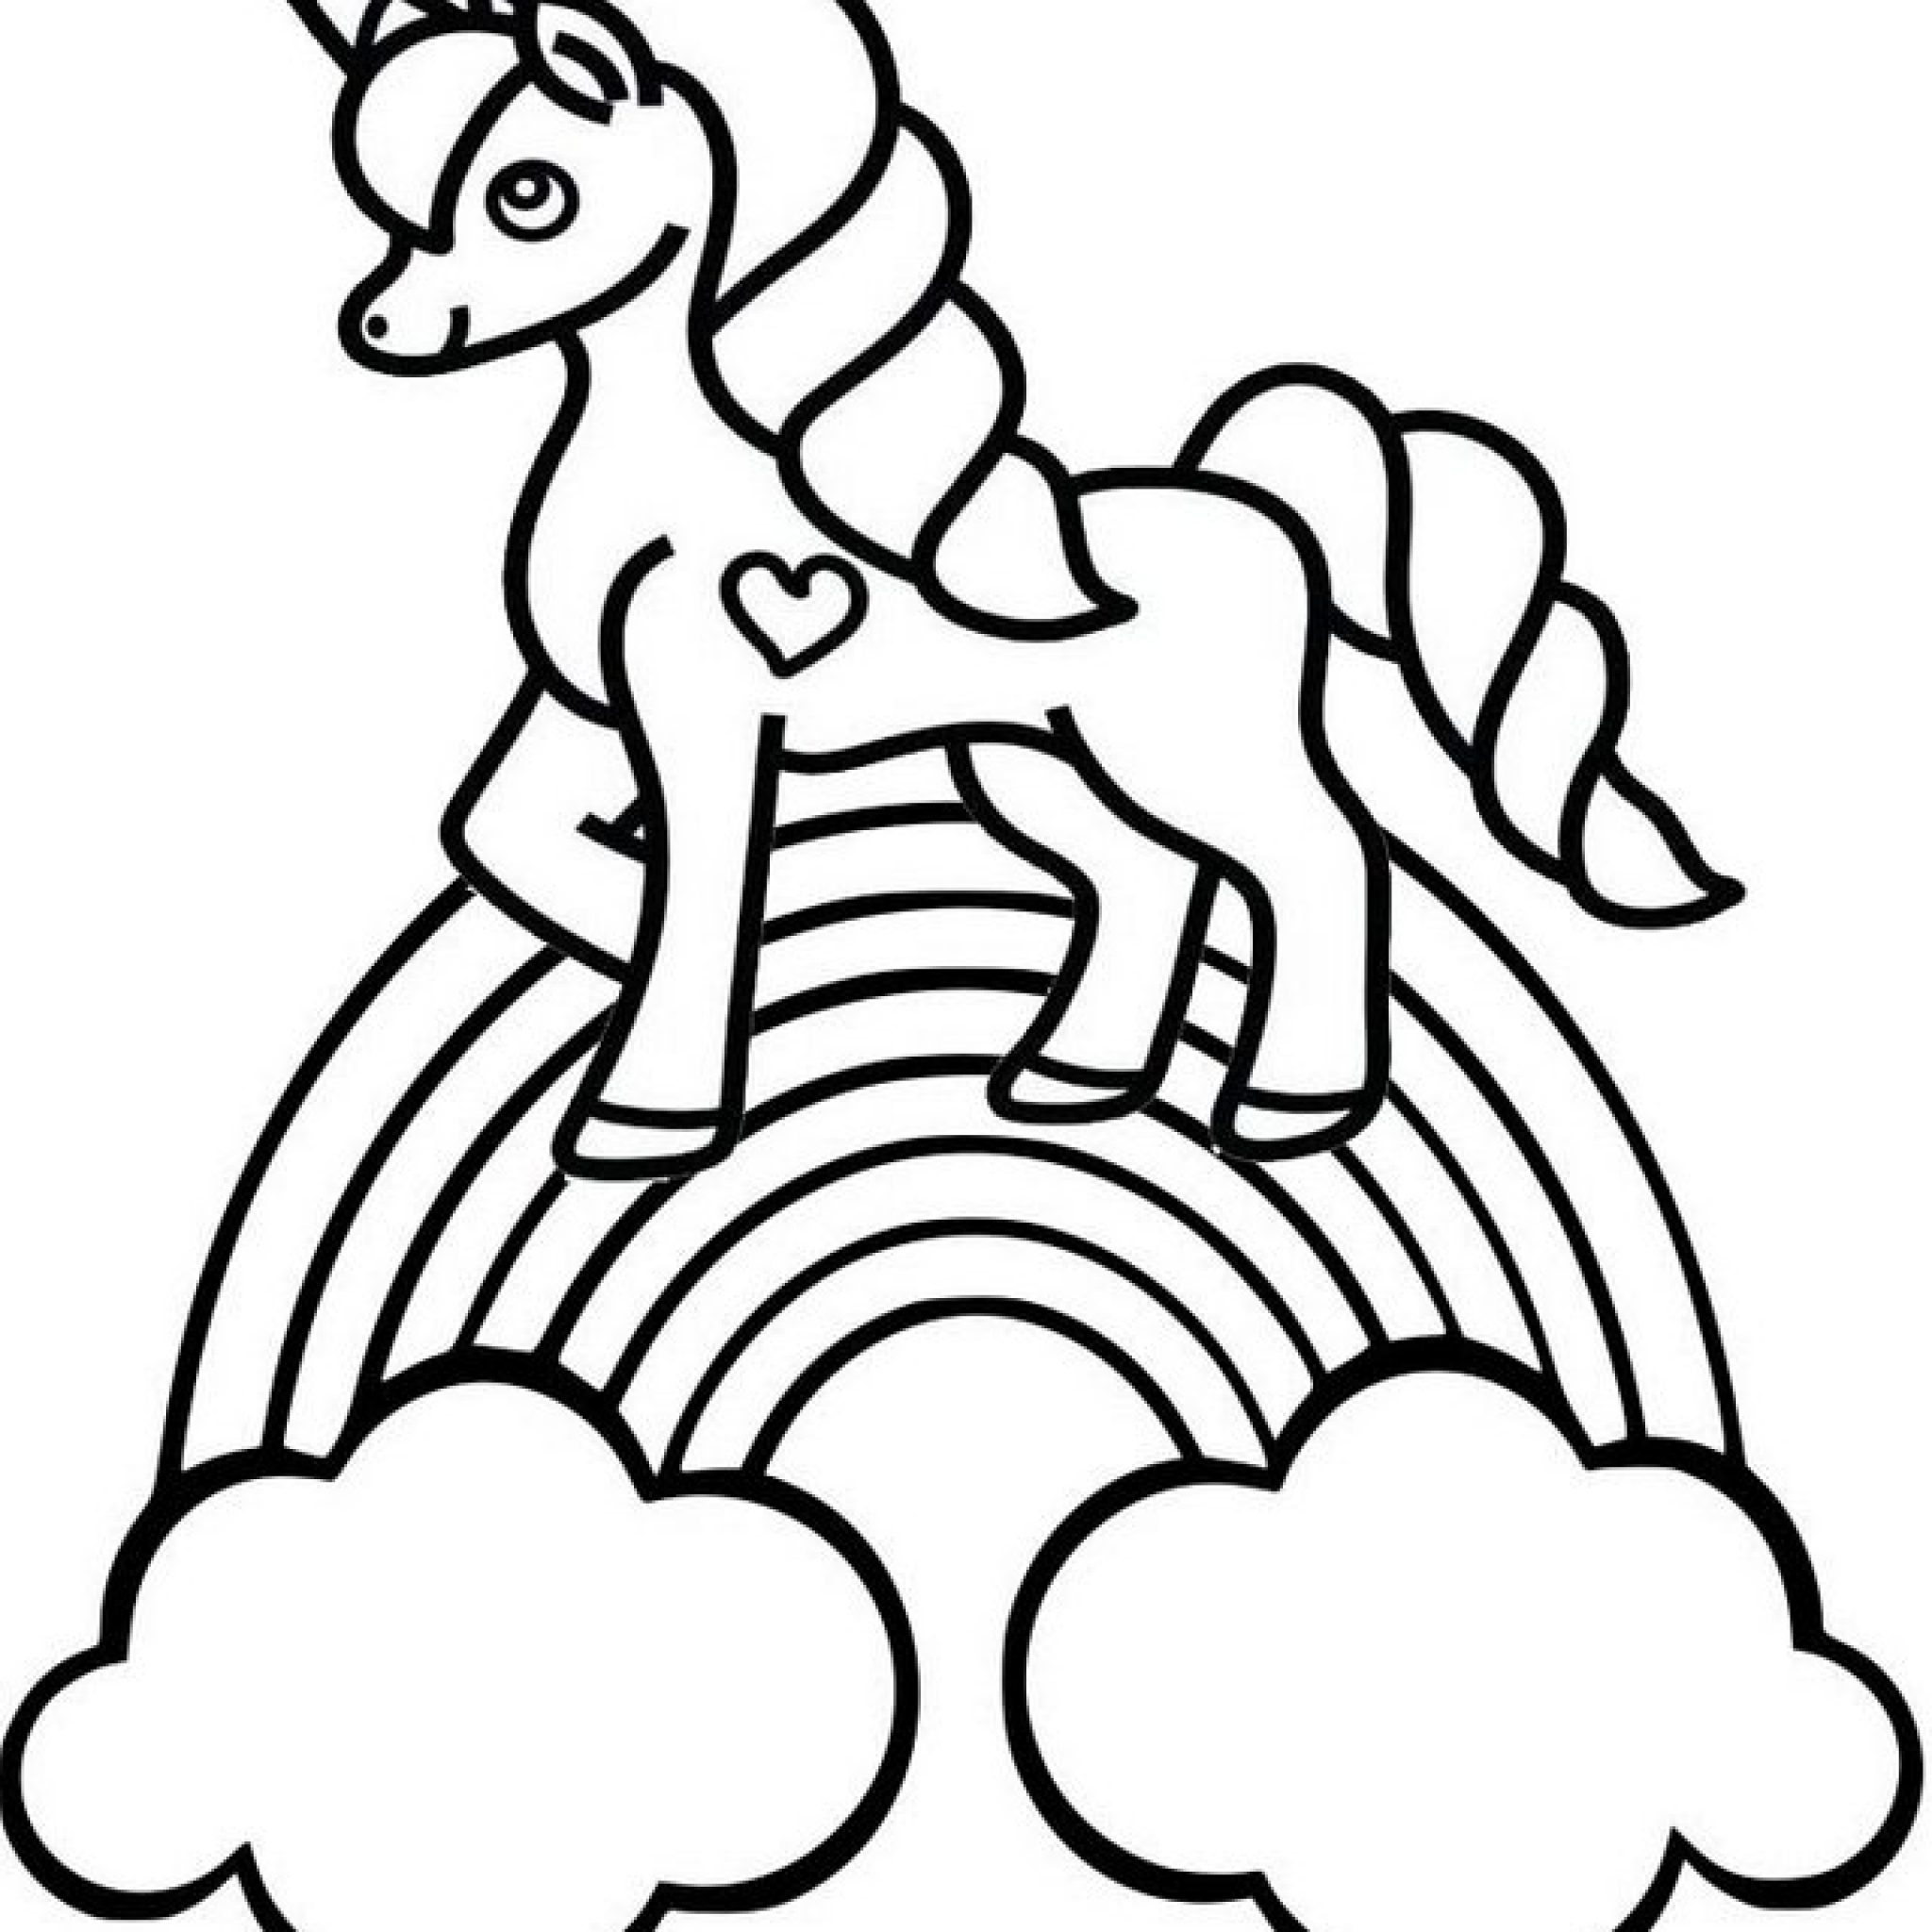 the gorgeous 15 minute unicorn coloring page for kids mitraland